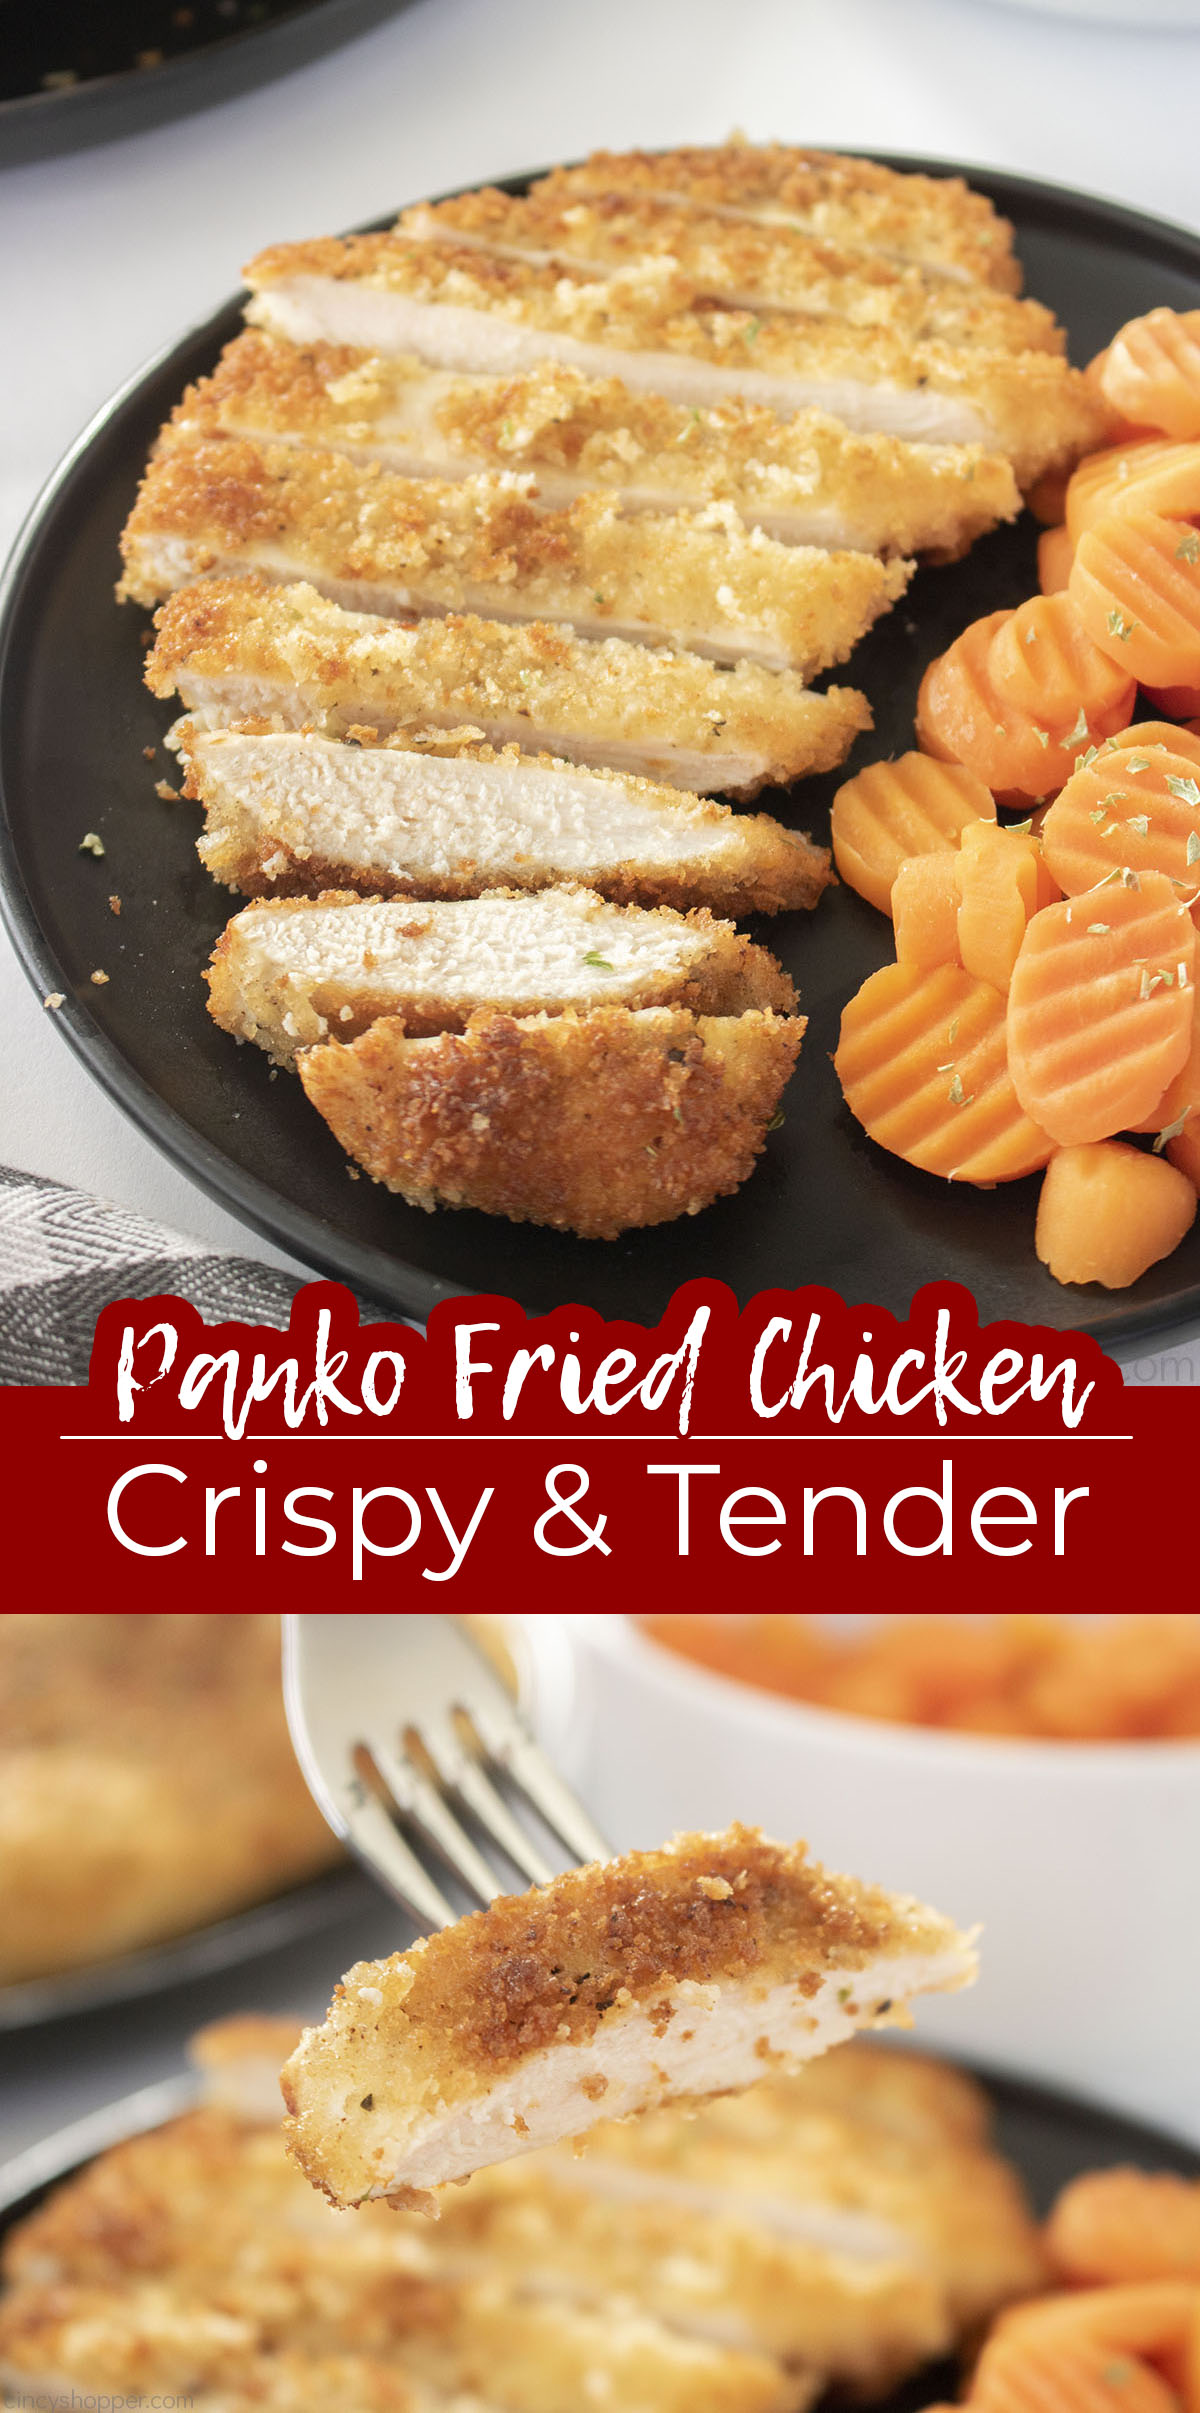 Long Pin Text on image Panko Fried Chicken Crispy and Tender.